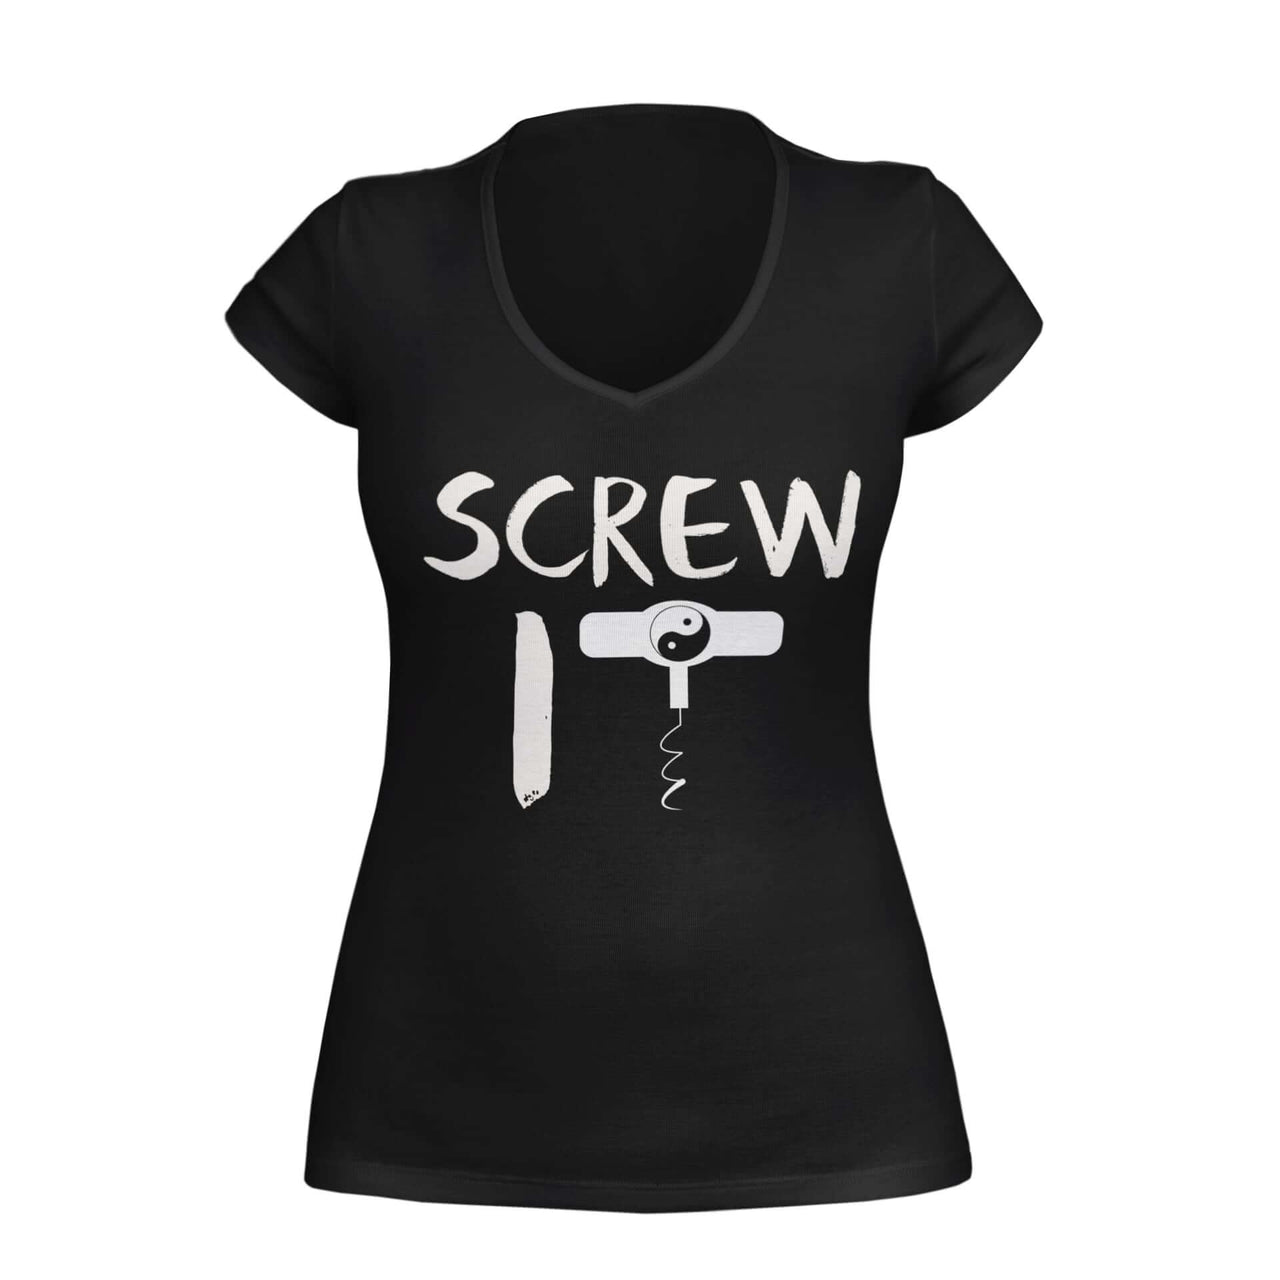 Black VNeck with text 'screw it' and a cork screw T forming a yin yang symbol, by WooHoo Apparel.